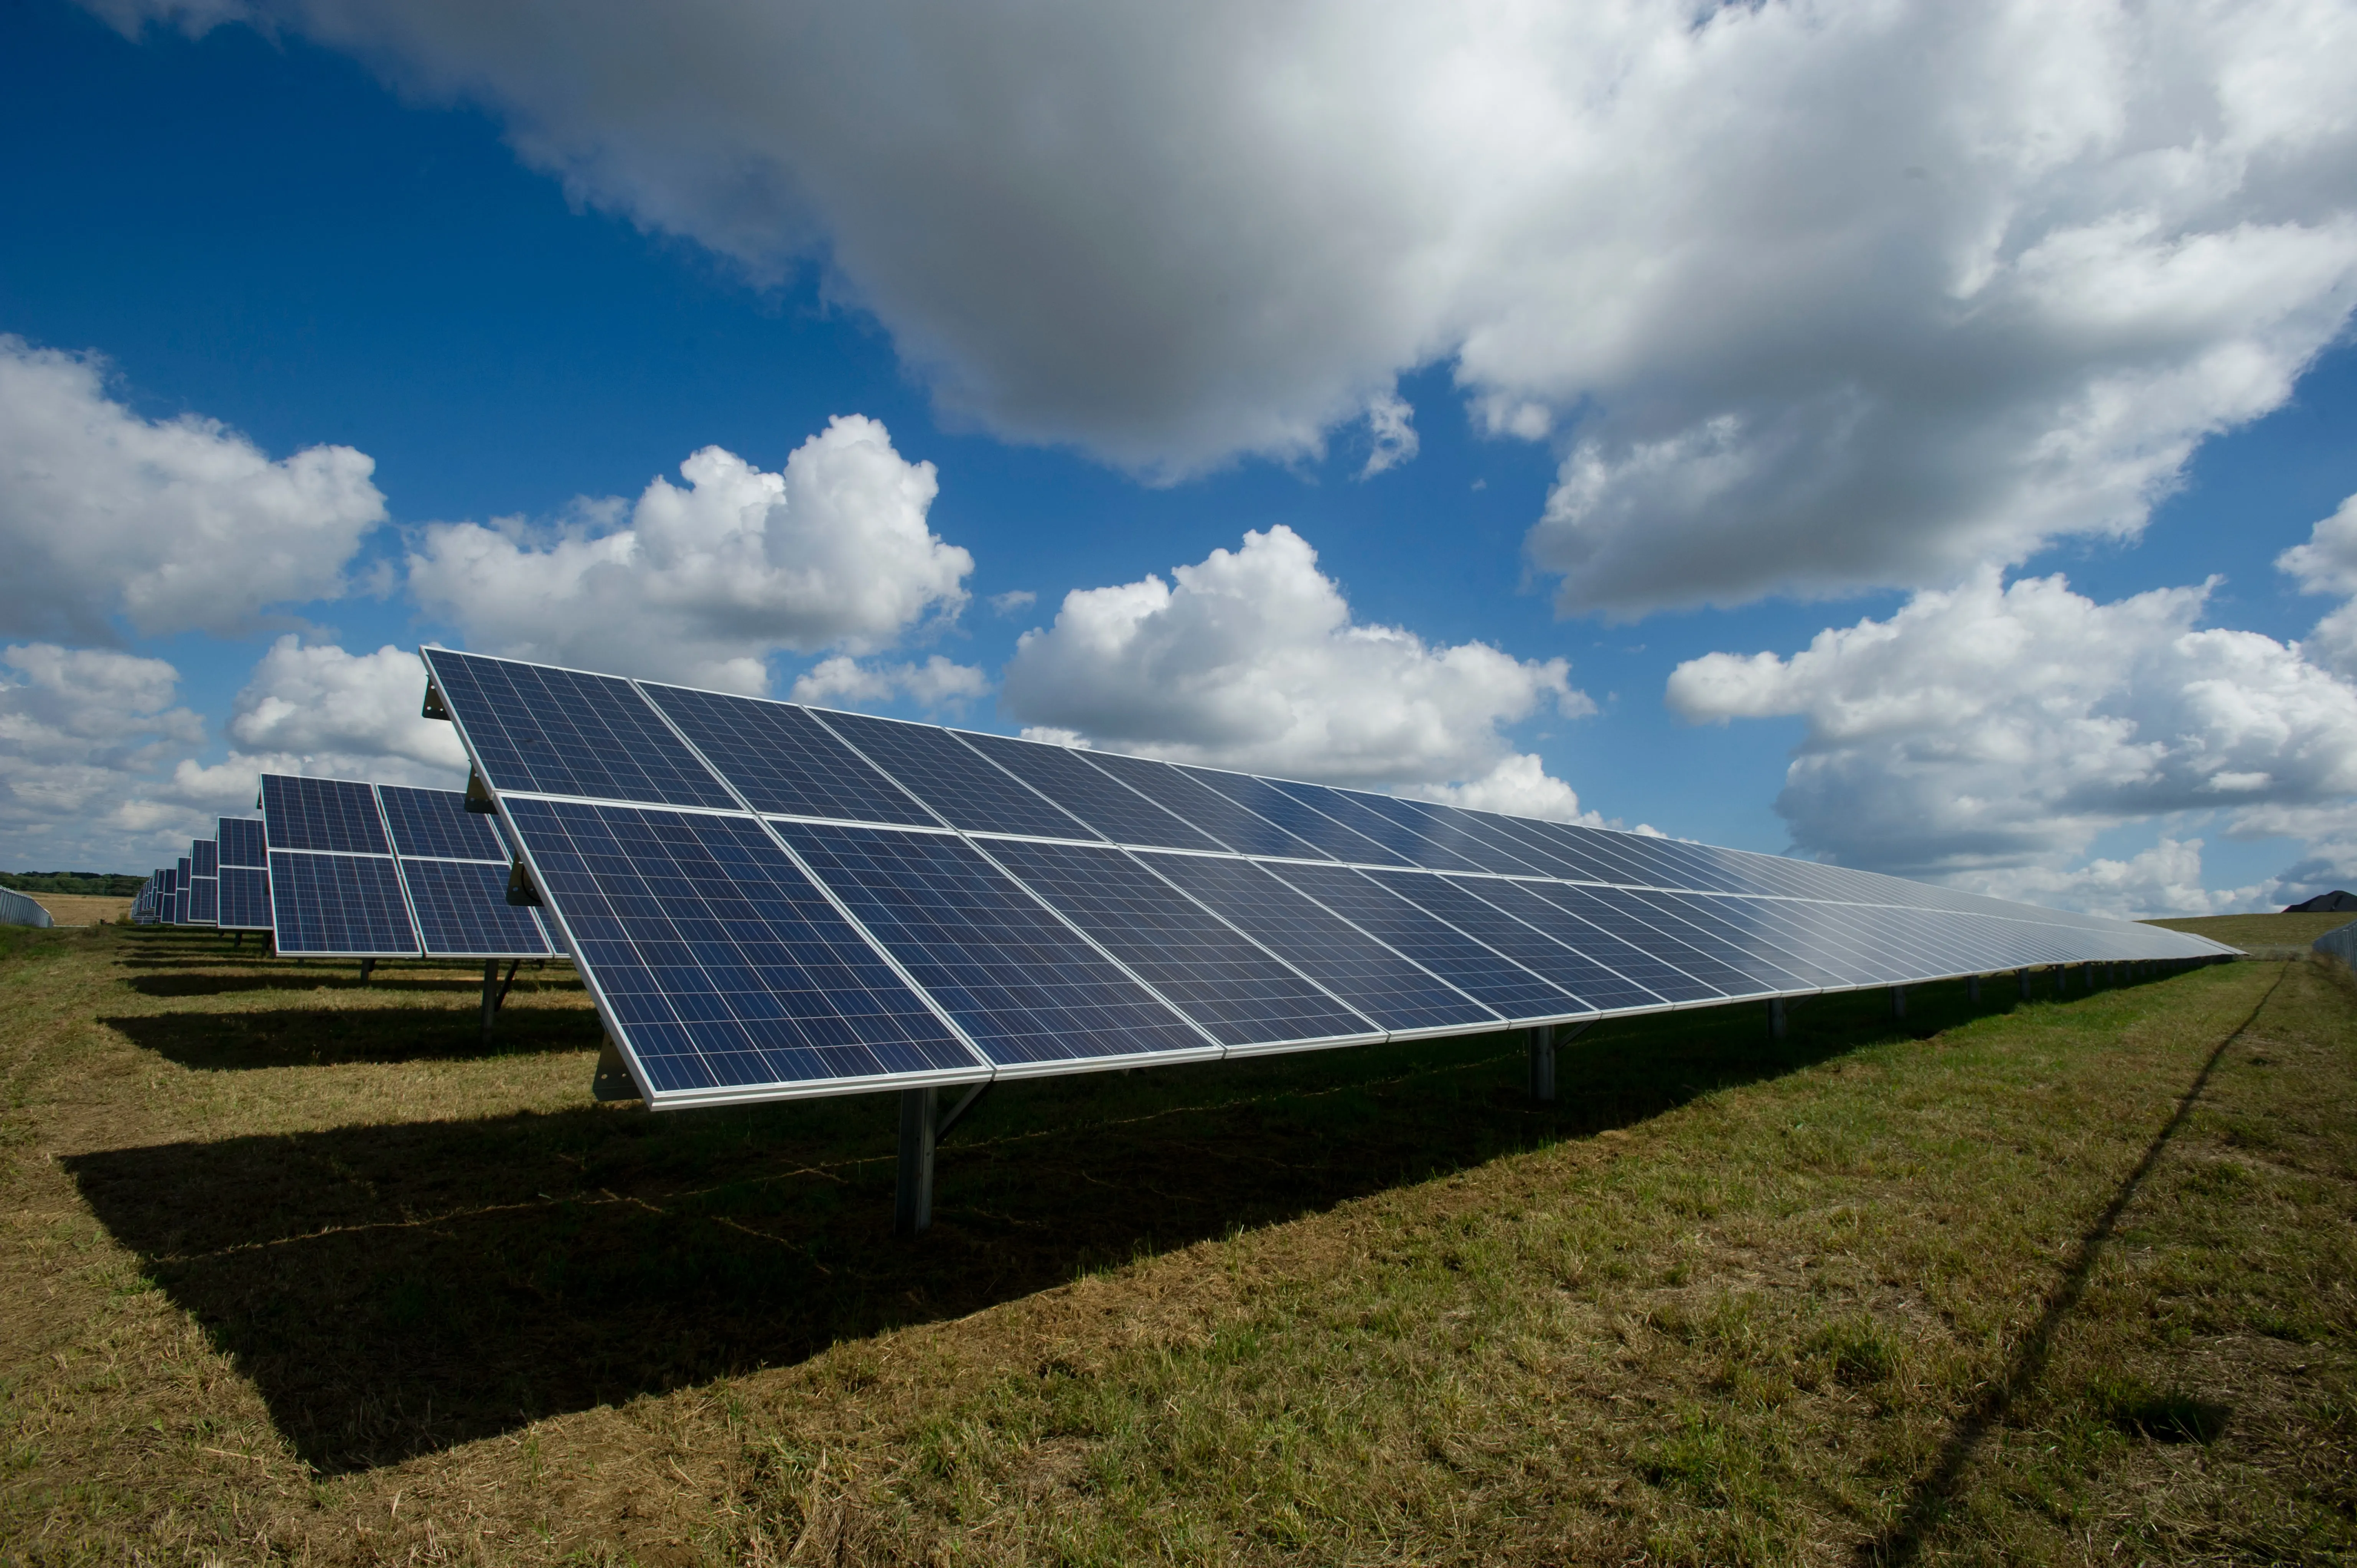 The Impact of Grid-connected Photovoltaic Power Generation on Power Quality and Solutions